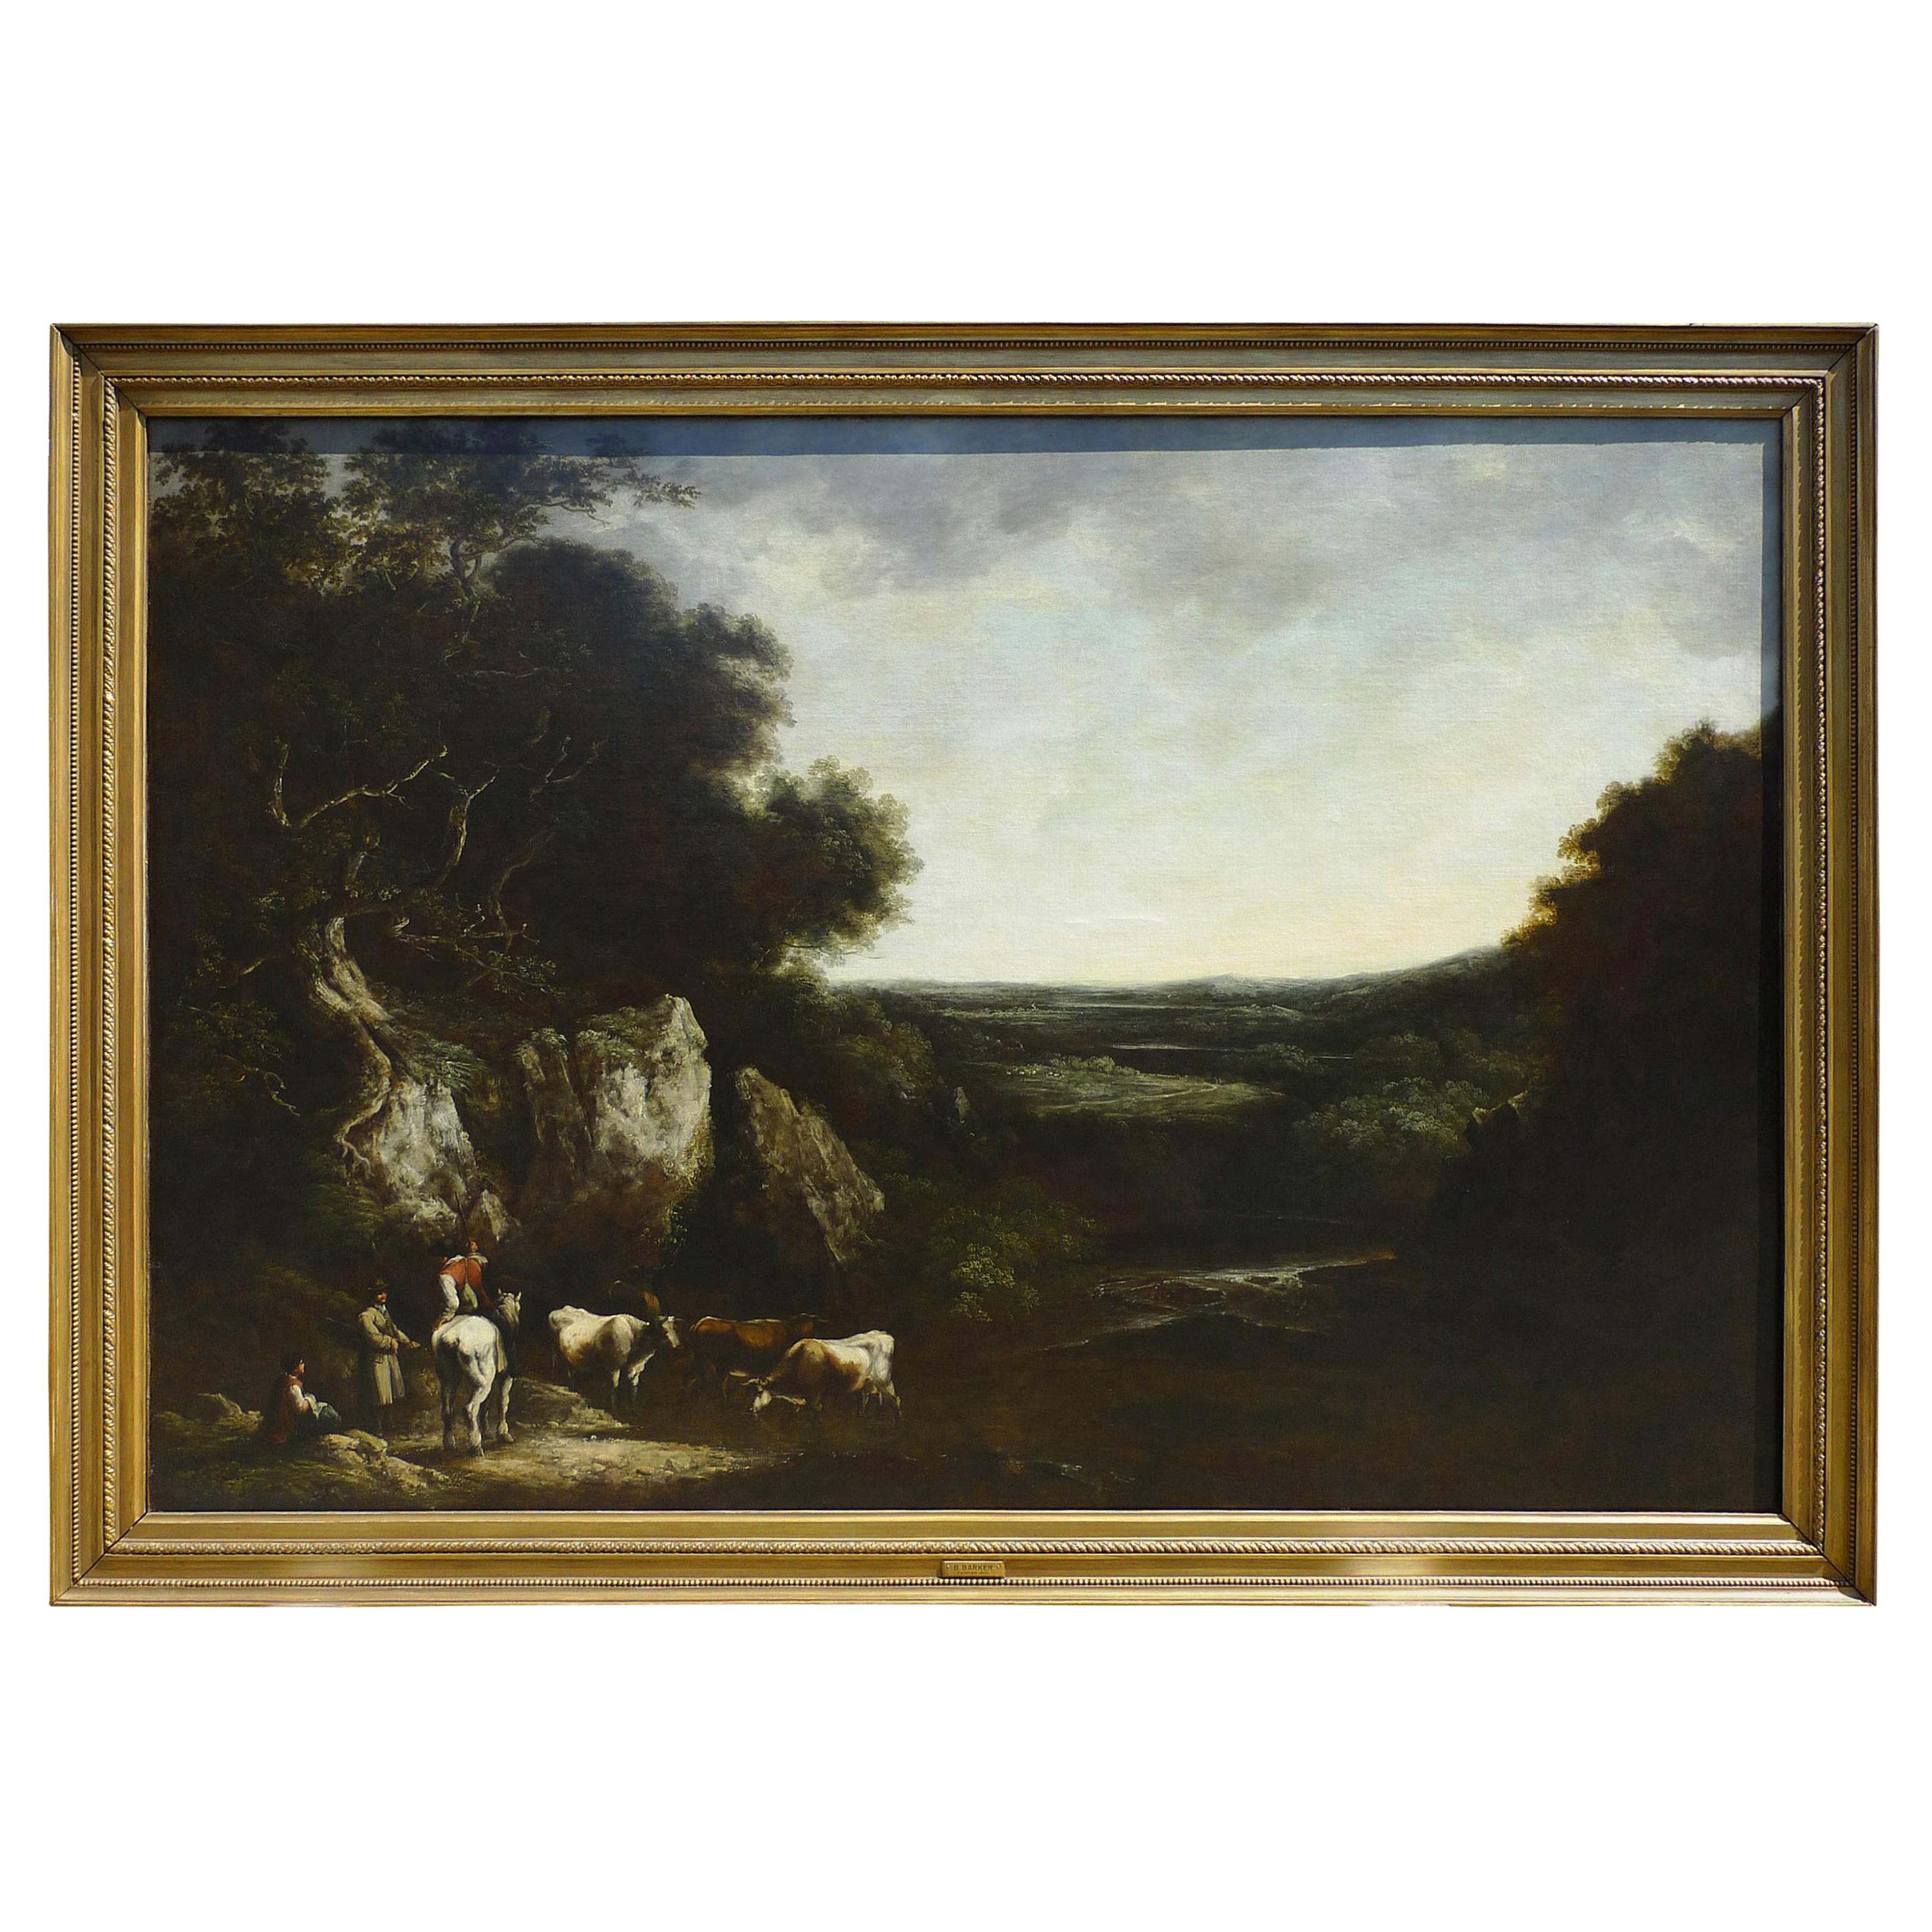 Benjamin Barker of Bath, Landscape with Cattle, Oil on Canvas Signed, Dated 1810